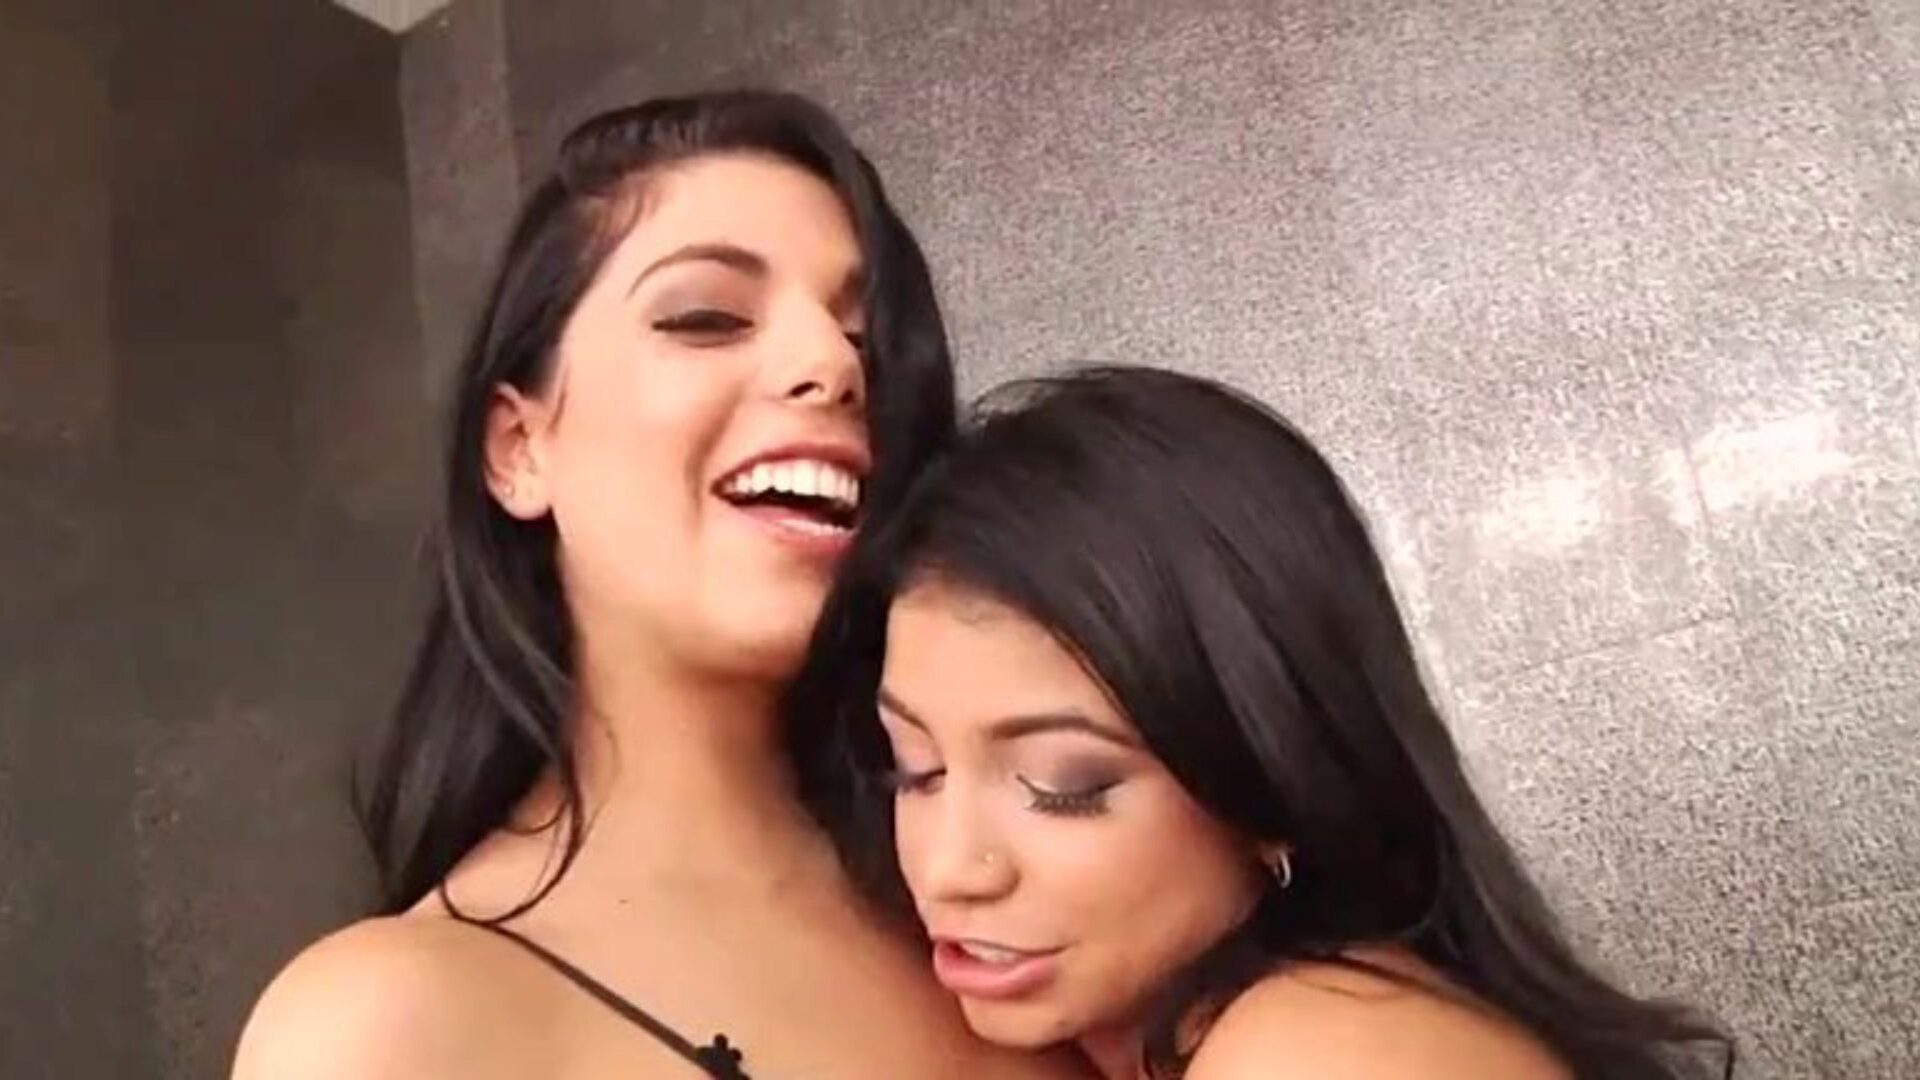 Hawt splattering Latin Chick hotties Gina Valentina and Veronica Rodriguez will show a soaked and mischievous fur pie frolicking with biggest splattering and multiple splashes